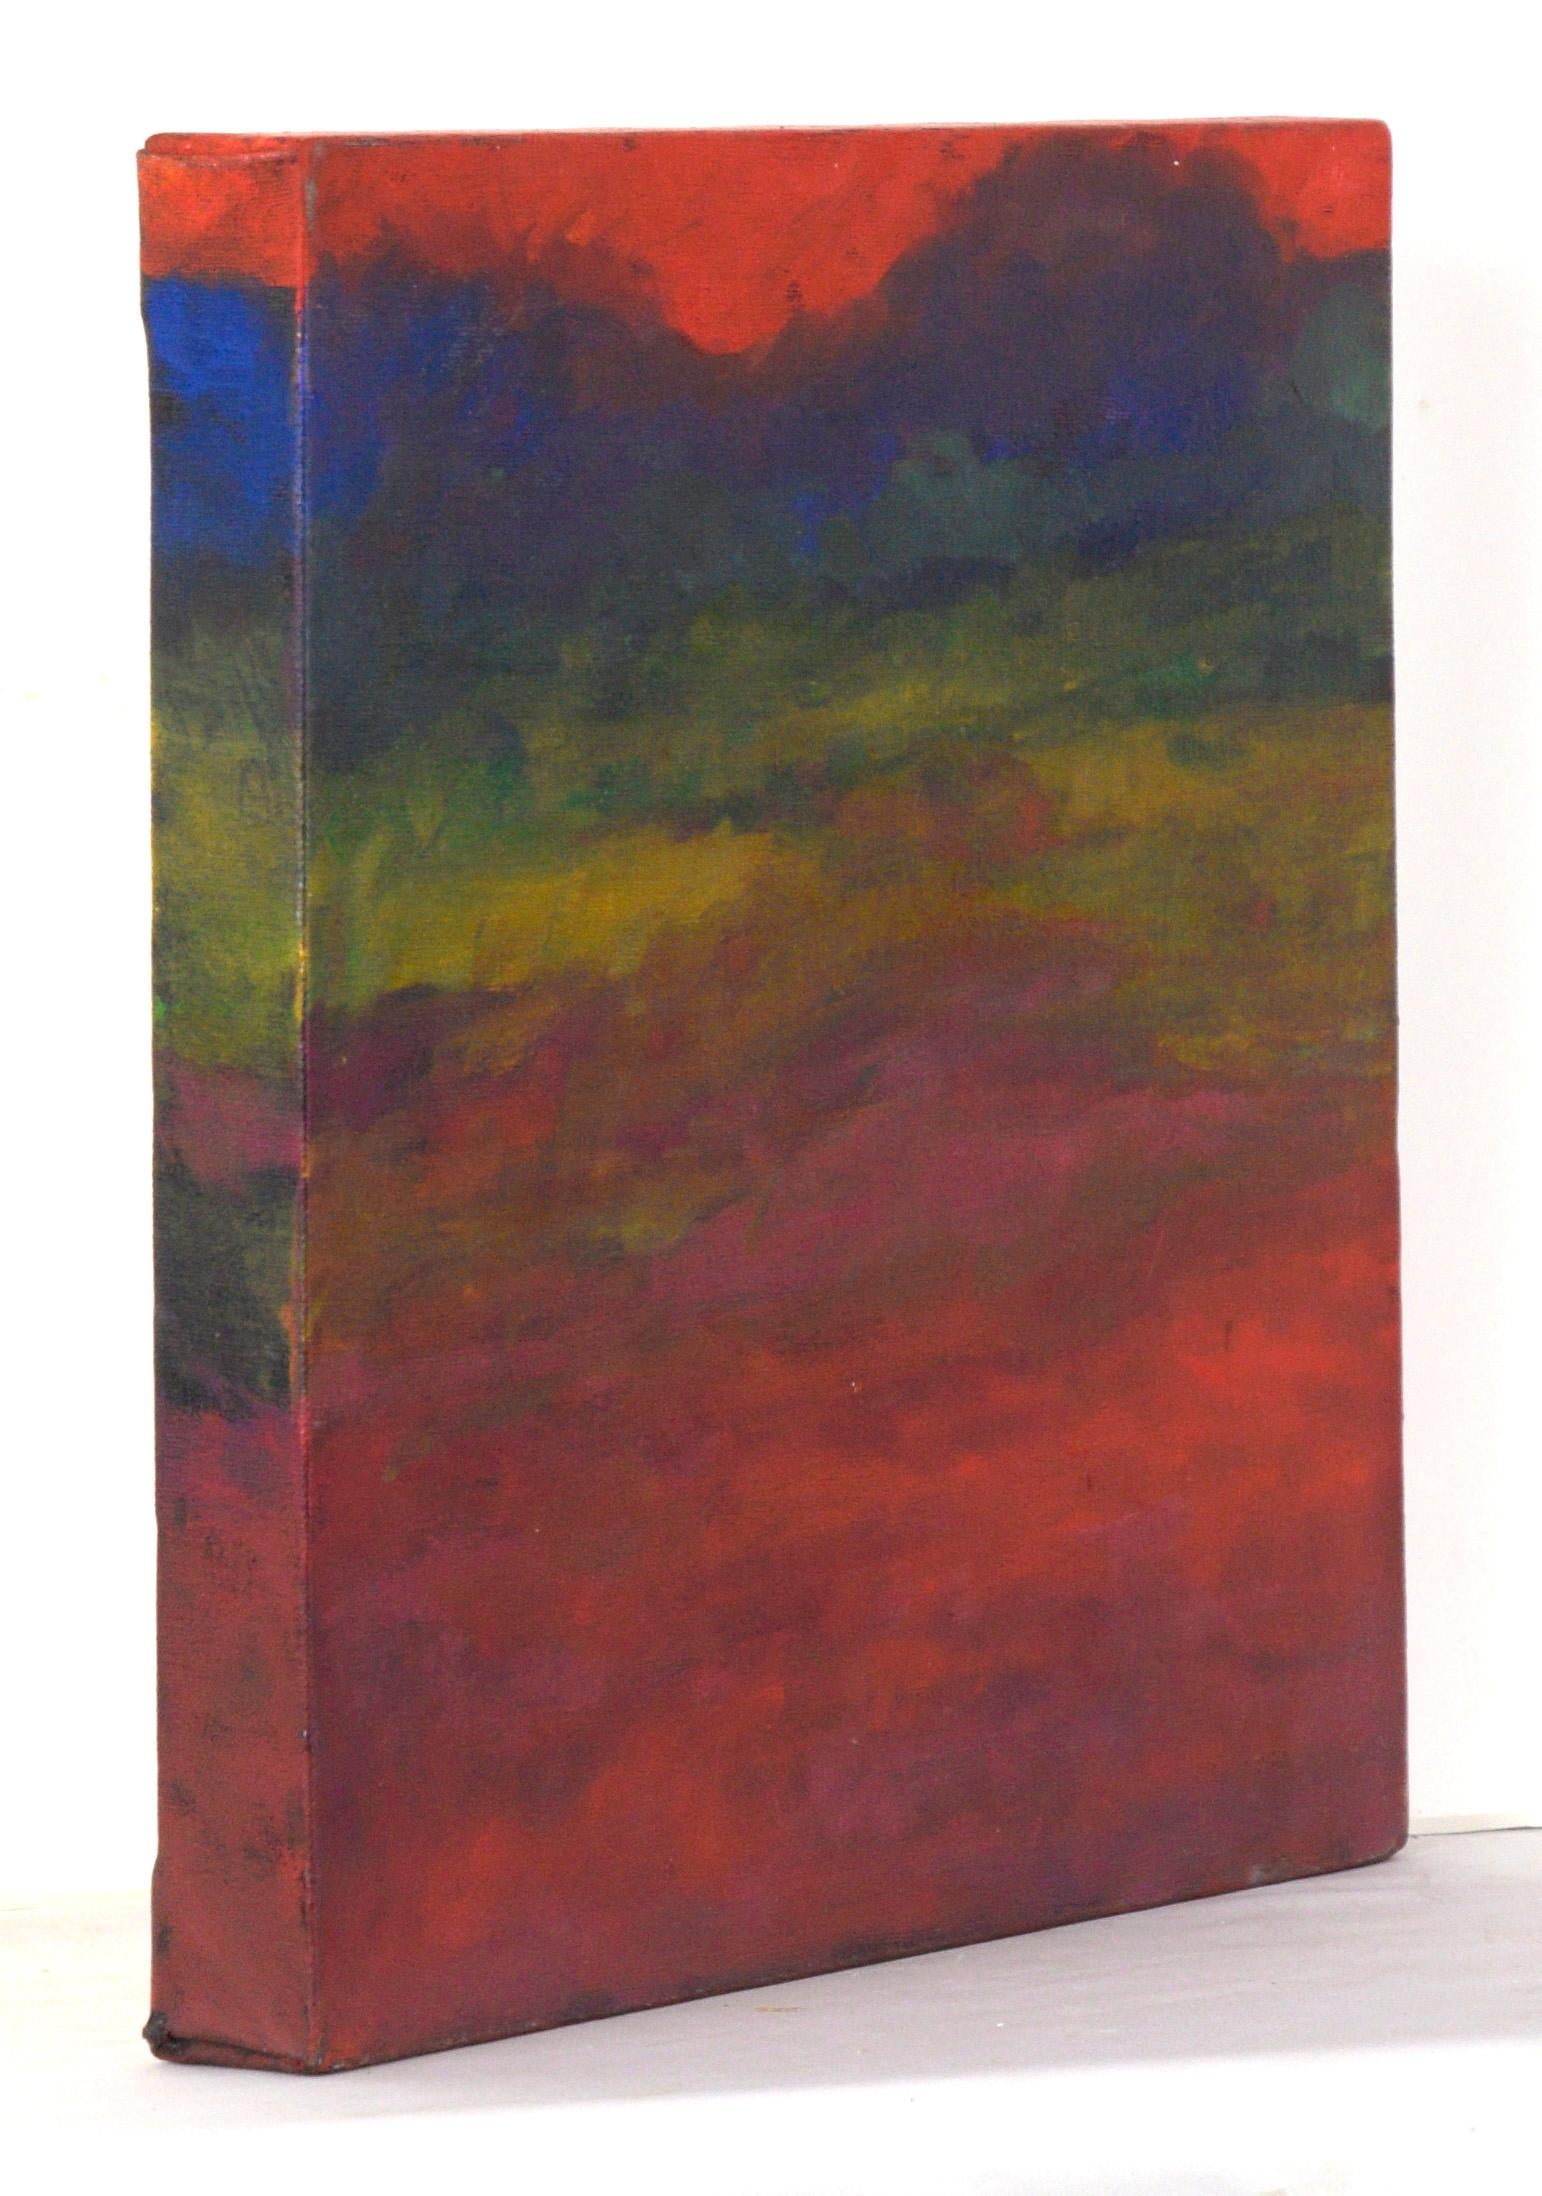 Glowing Red Sunset - Abstracted Landscape in Acrylic on Canvas For Sale 1